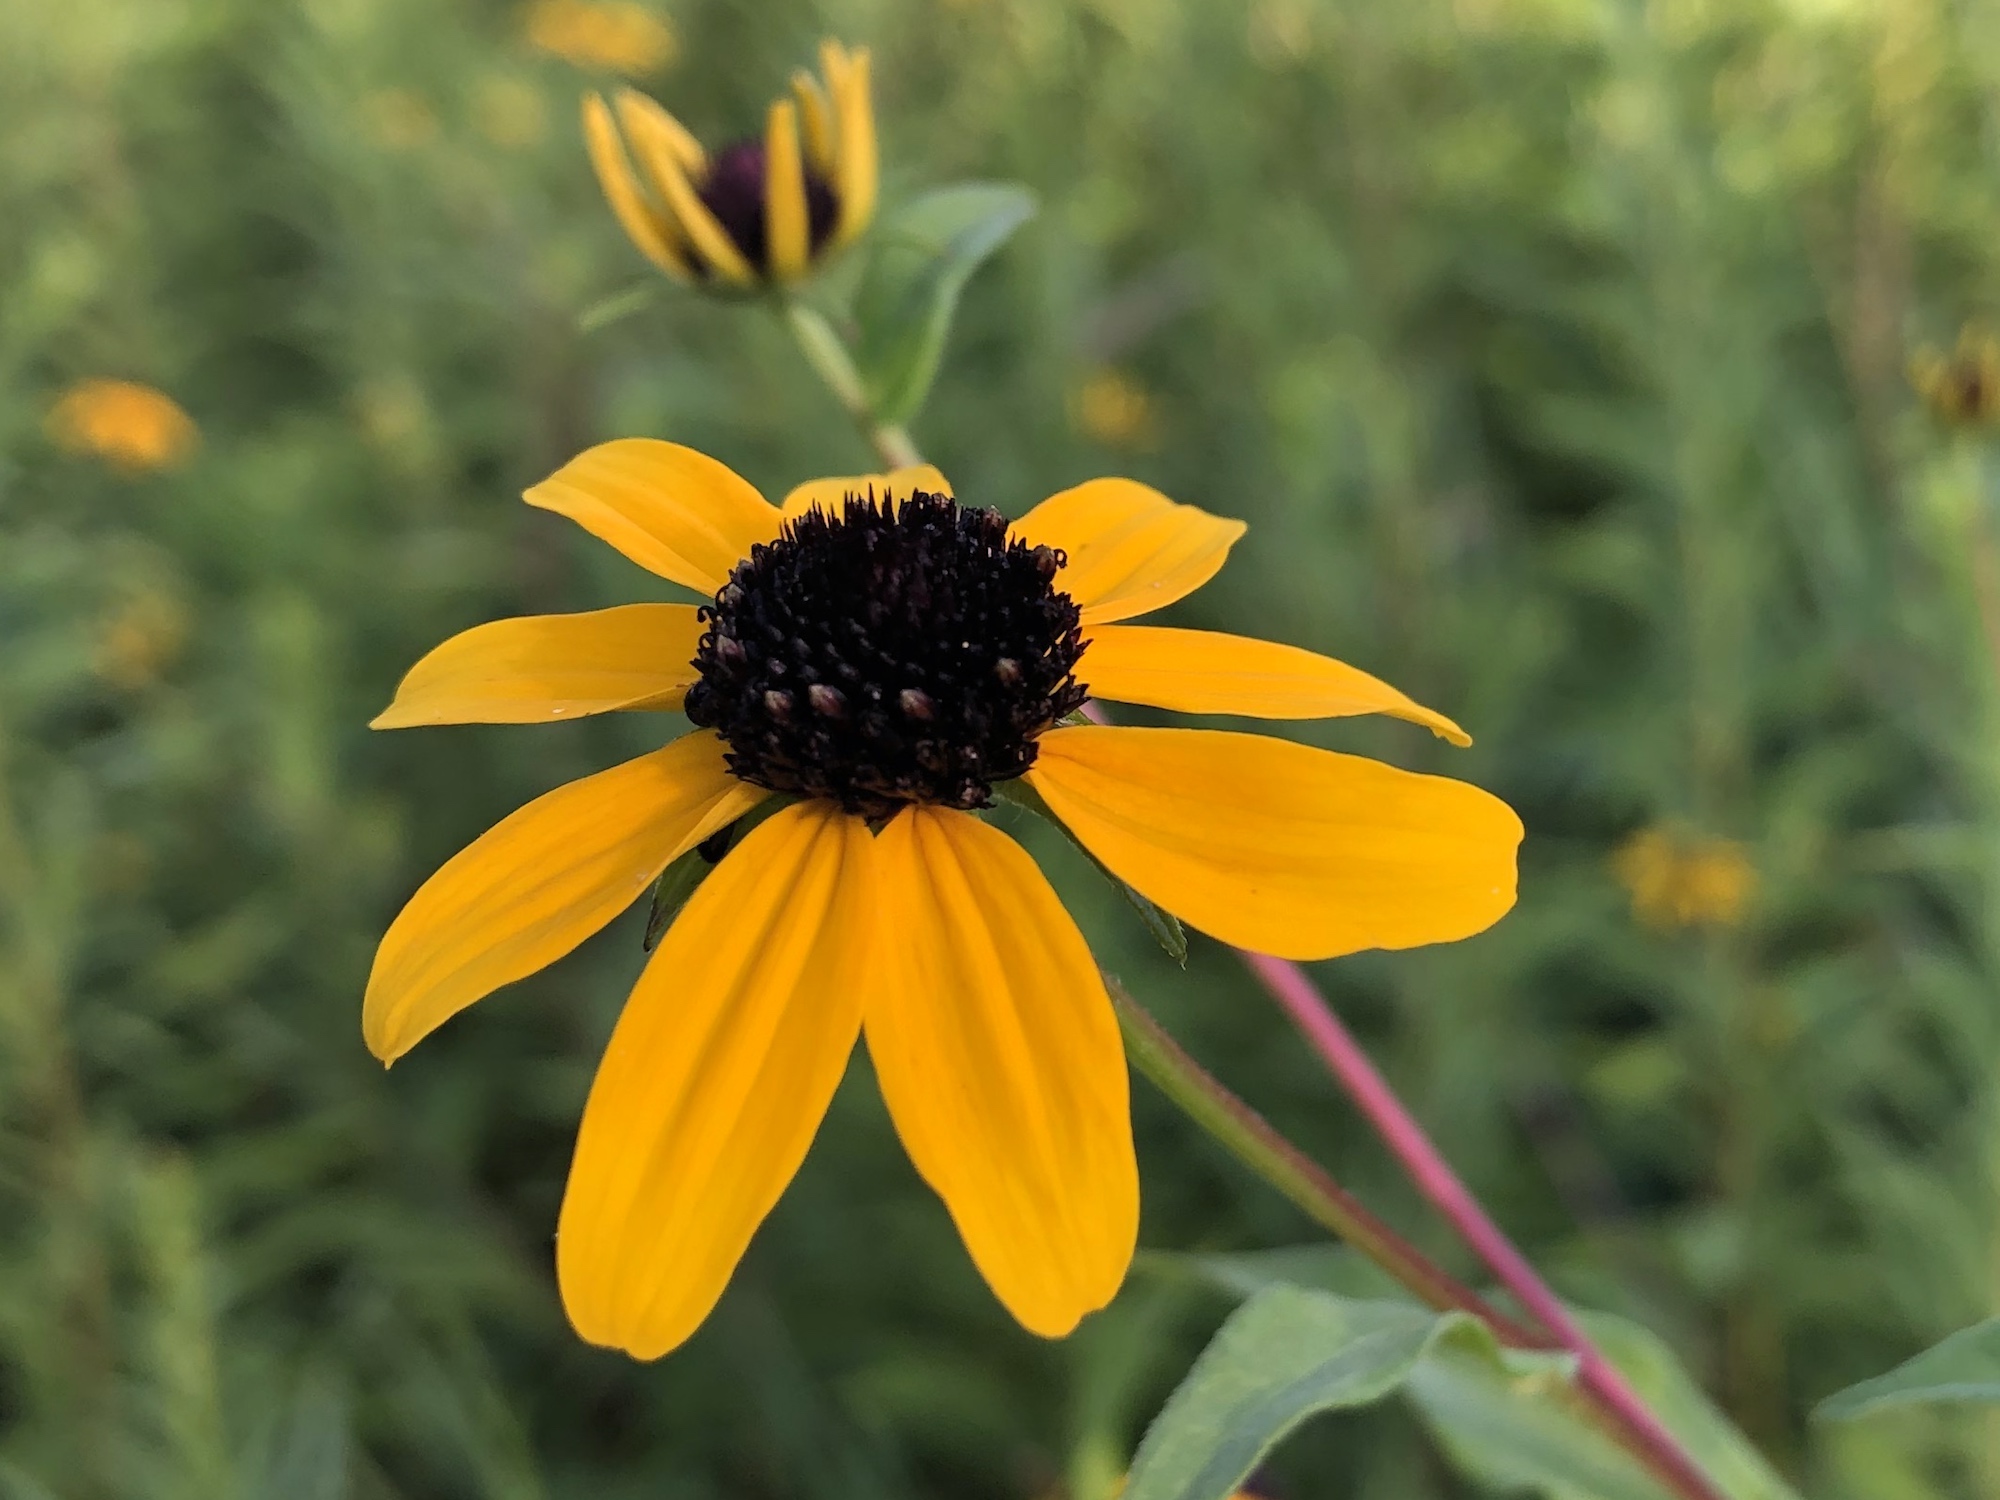 Brown-eyed Susan on bank of retaining pond in Madison, Wisconsin on July 31, 2020.